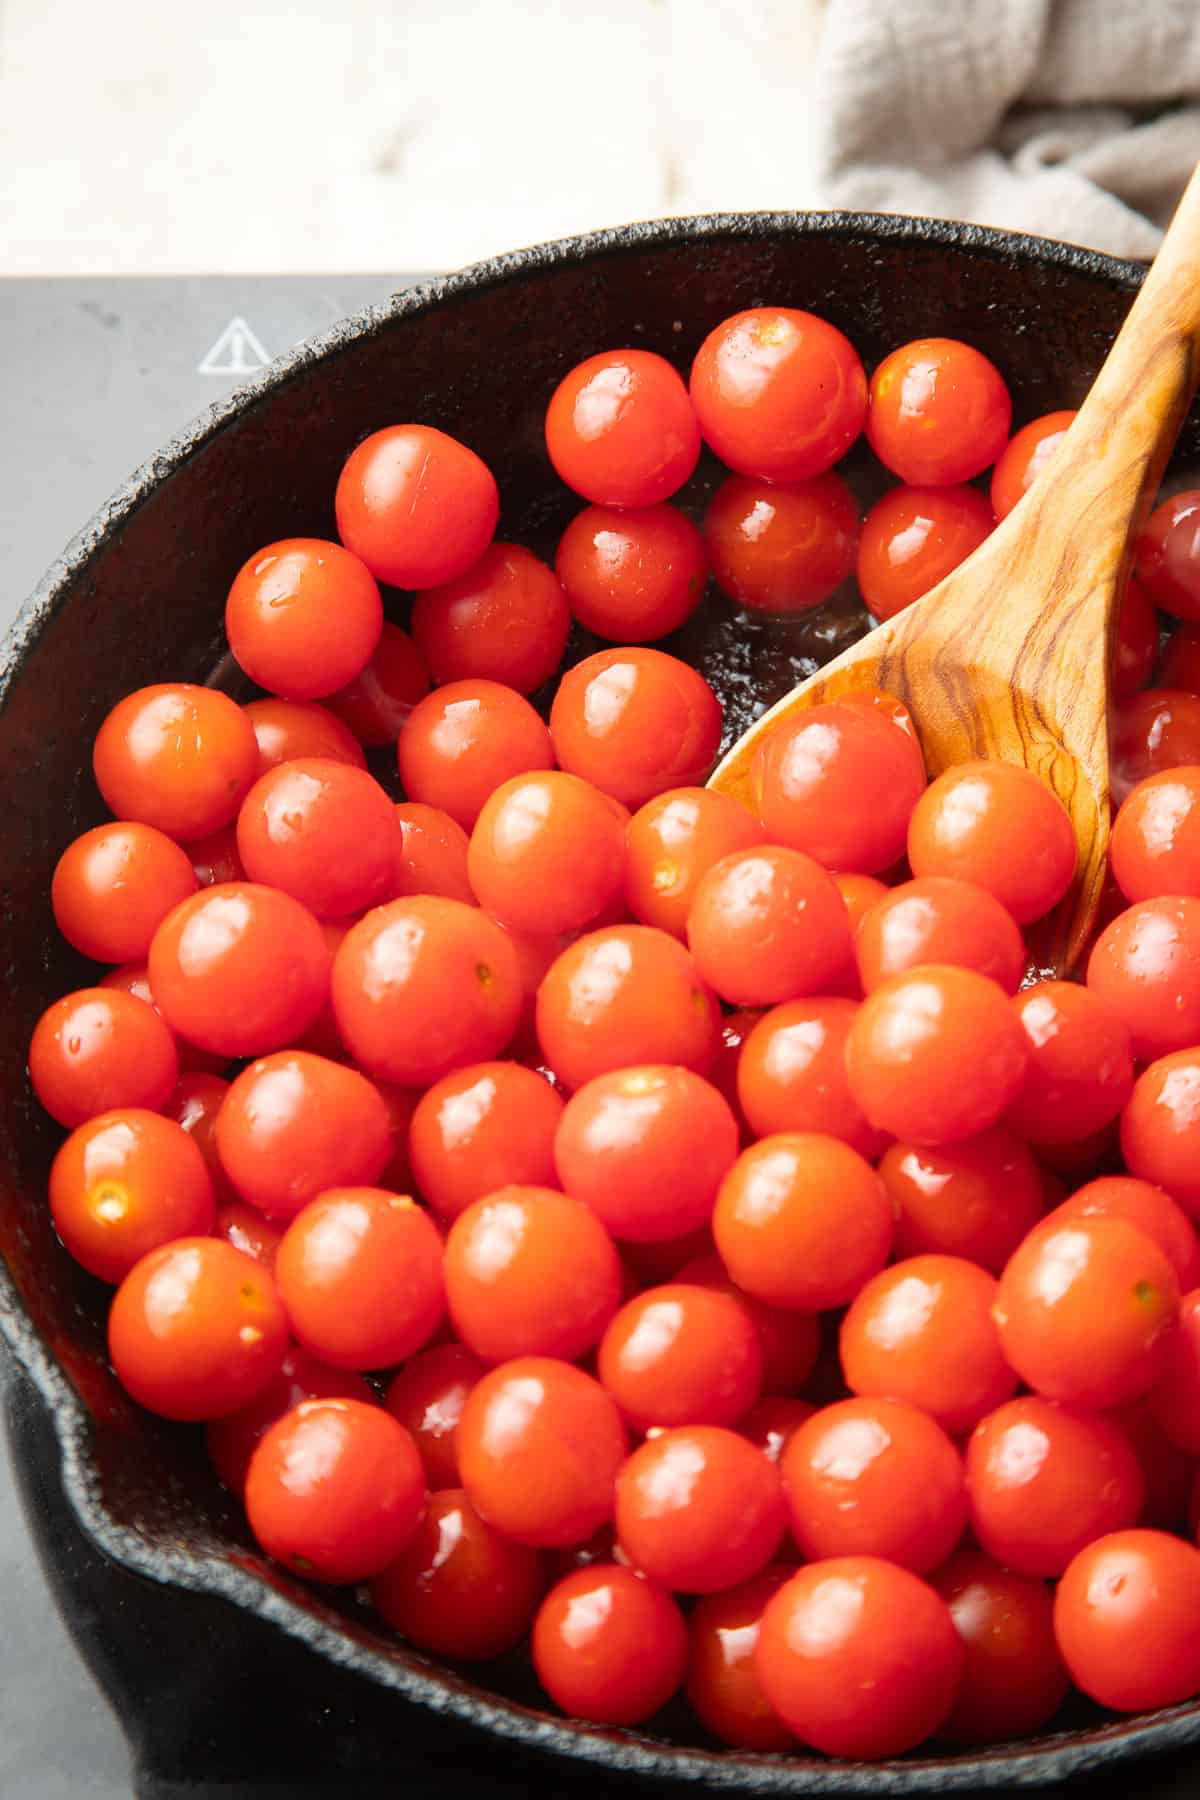 Cherry tomatoes in a skillet with a wooden spoon.